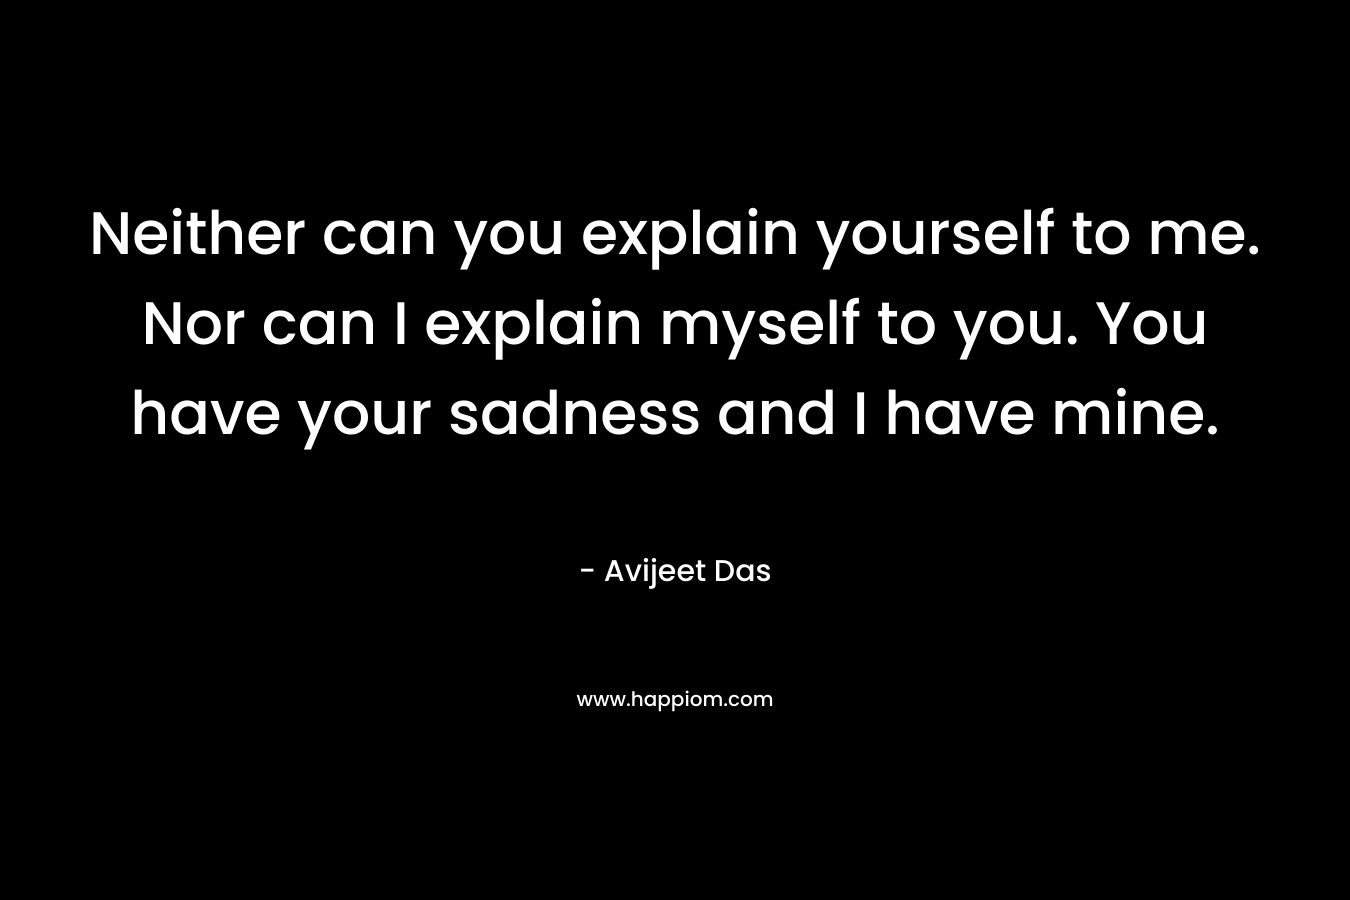 Neither can you explain yourself to me. Nor can I explain myself to you. You have your sadness and I have mine.